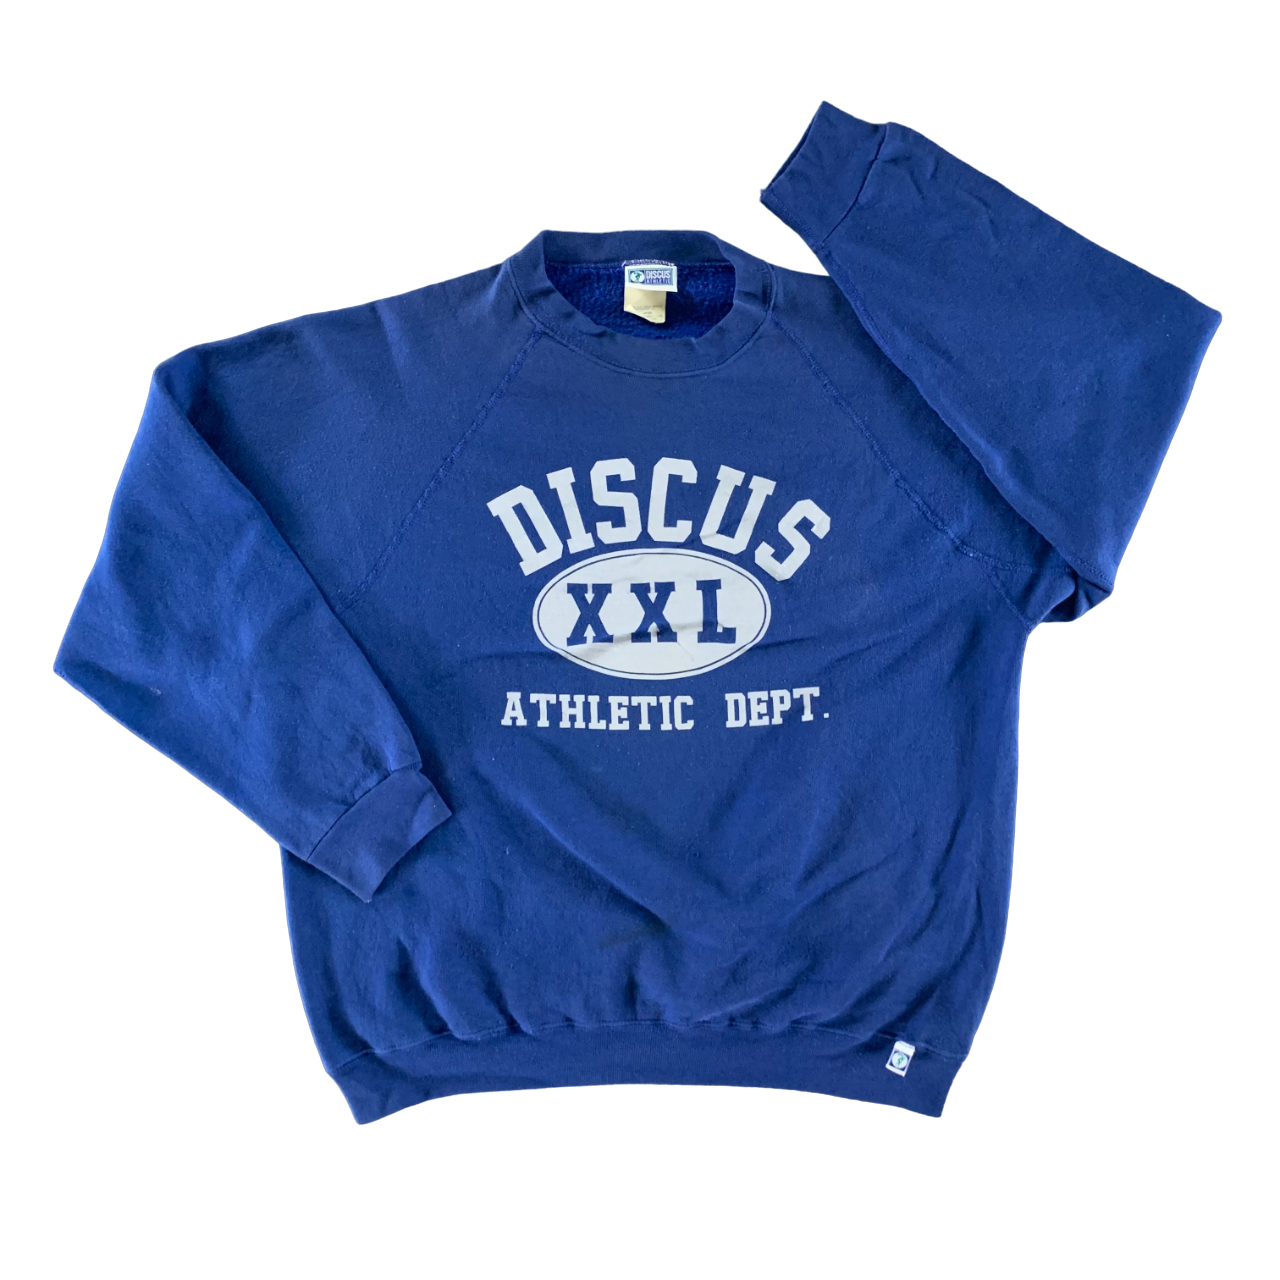 Vintage Early 1990s Discus Sweatshirt size XL